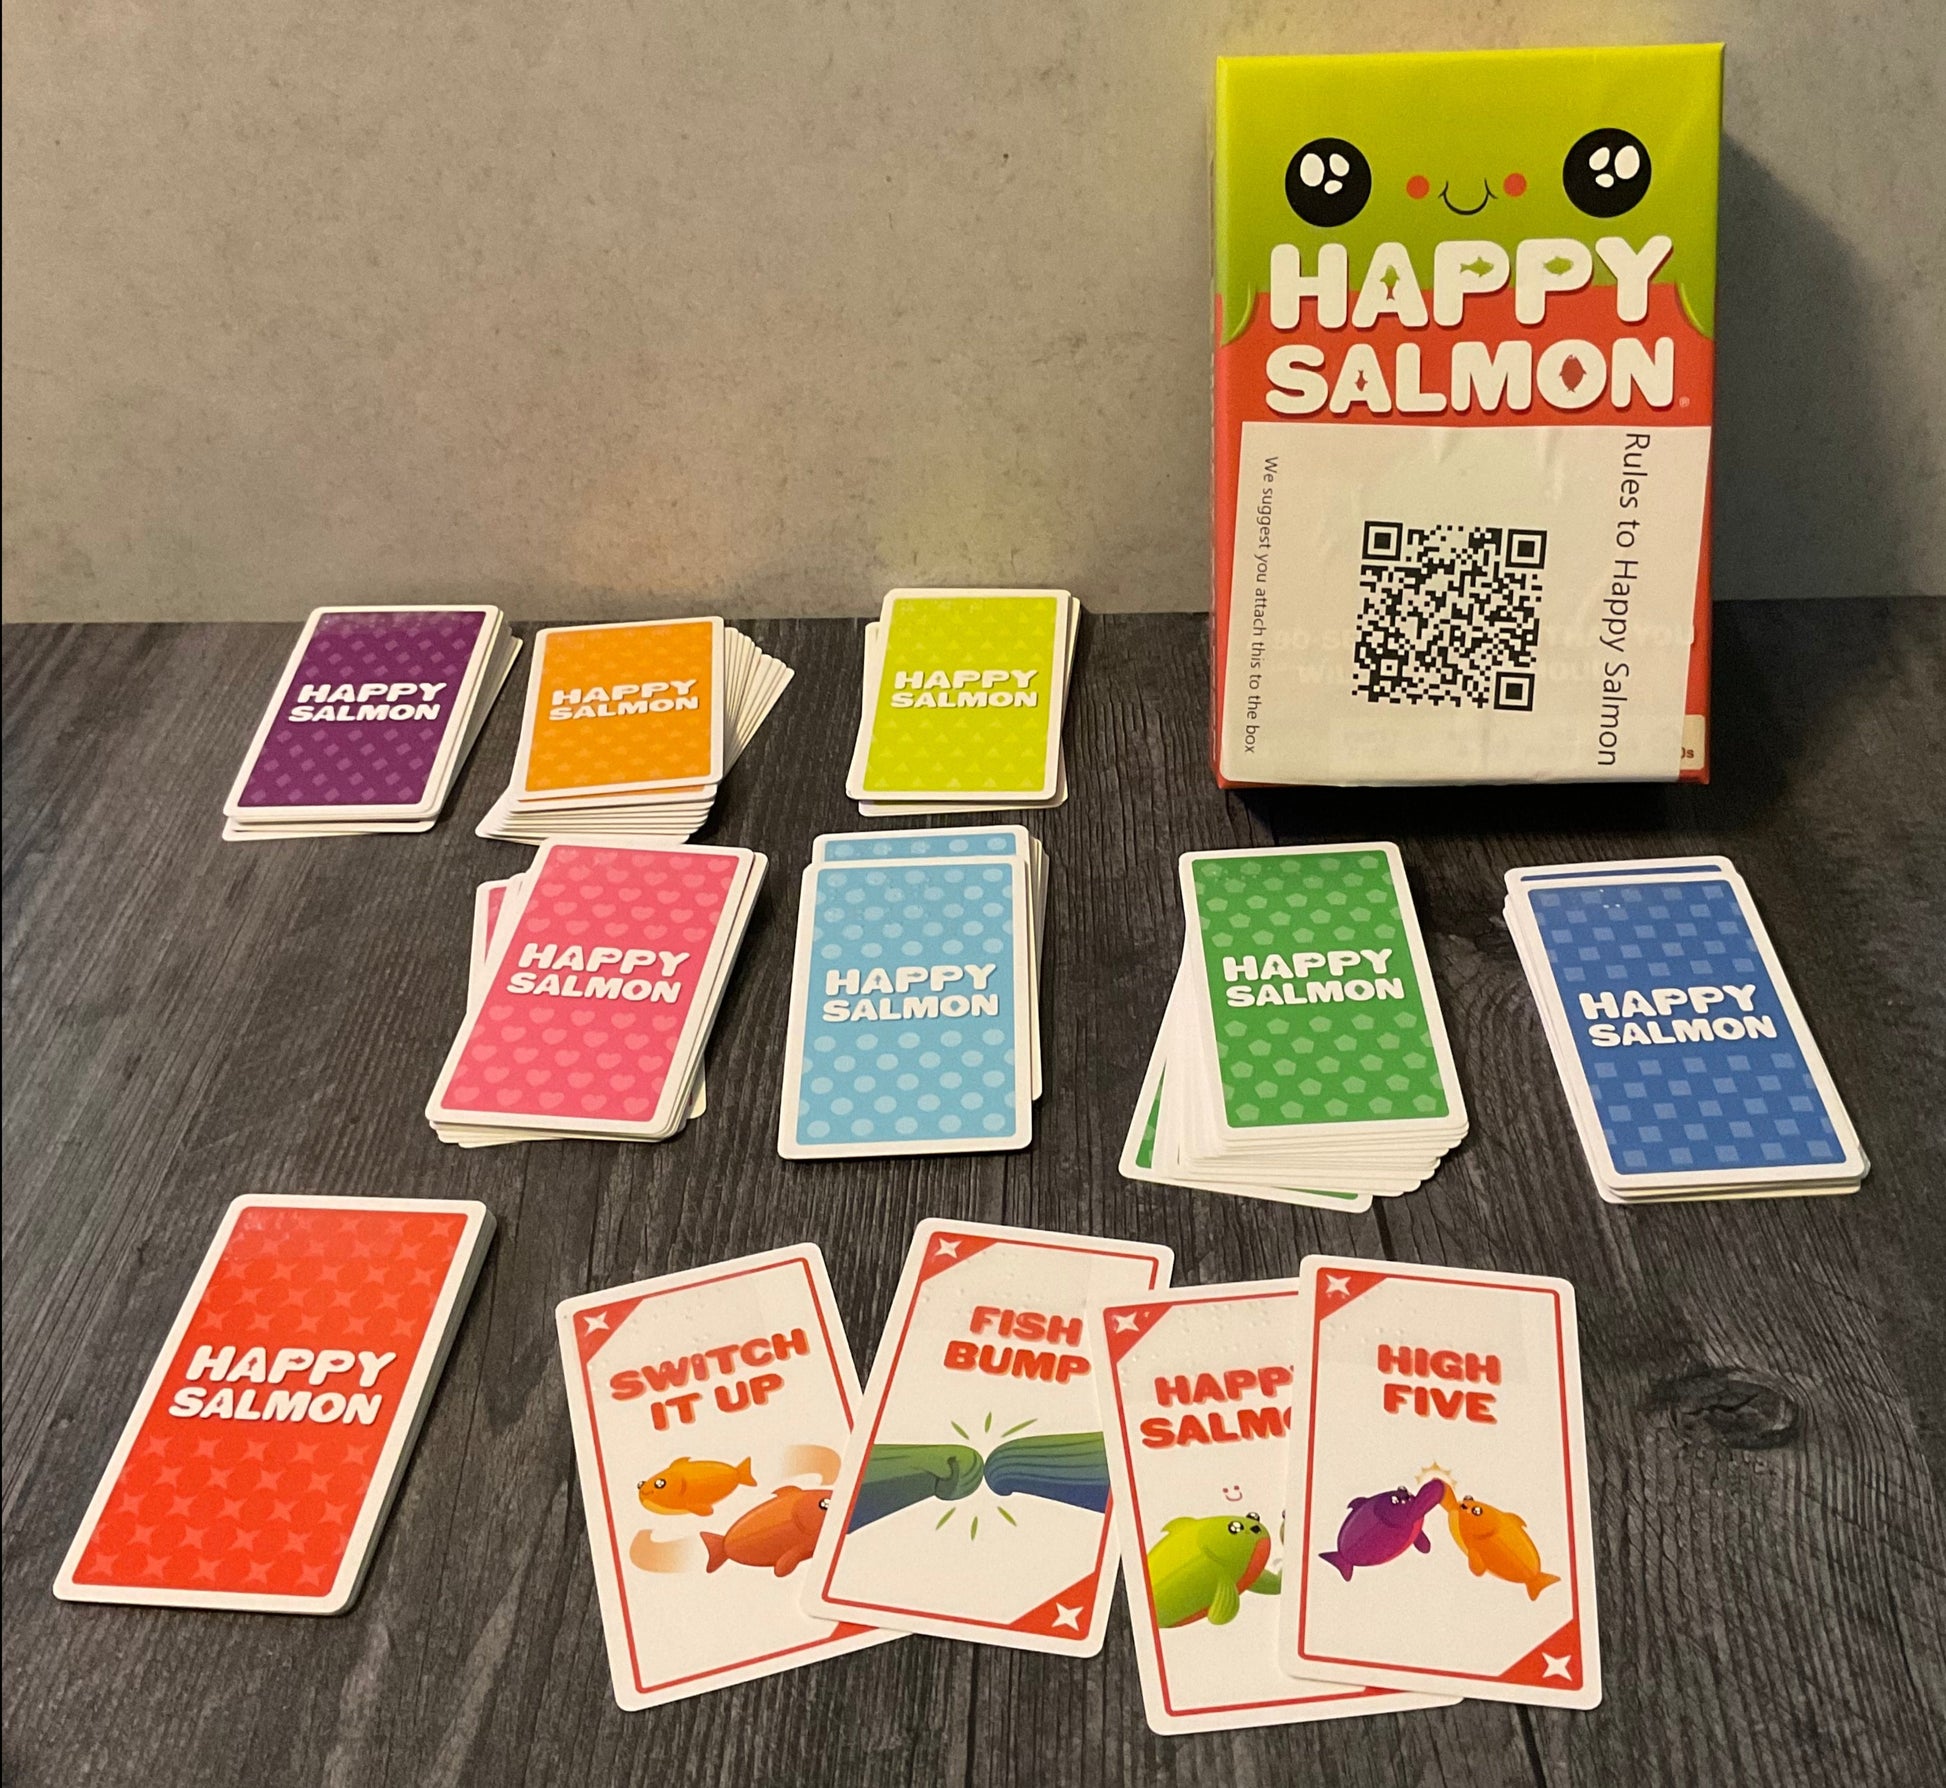 The game happy salmon with transparent braille on all of the cards.